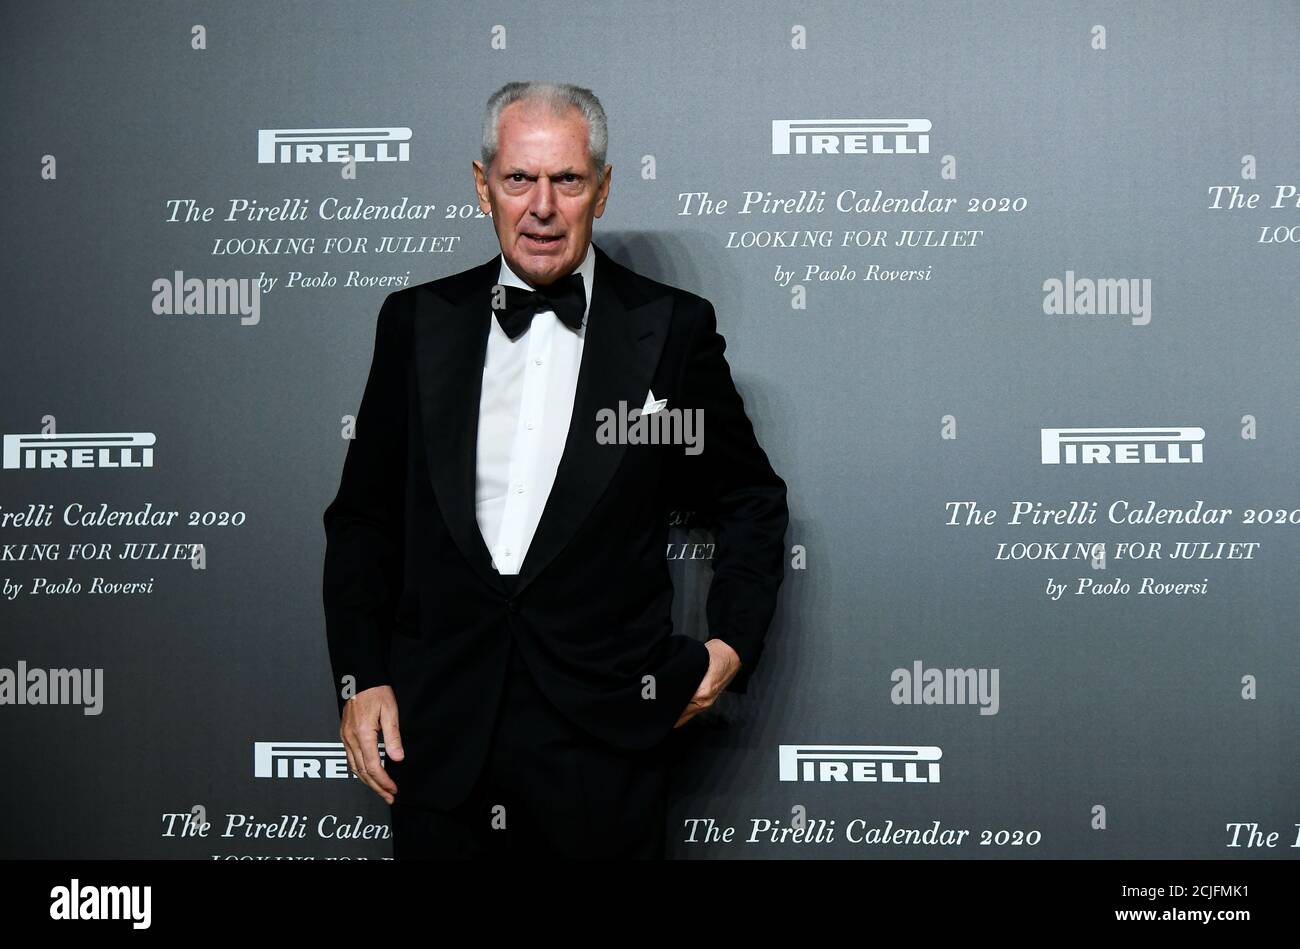 Chief Executive Officer of Pirelli Marco Tronchetti Provera poses as he  arrives at the launch of the "Looking for Juliet" 2020 Pirelli Calendar, in  the northern Italian city of Verona, Italy December